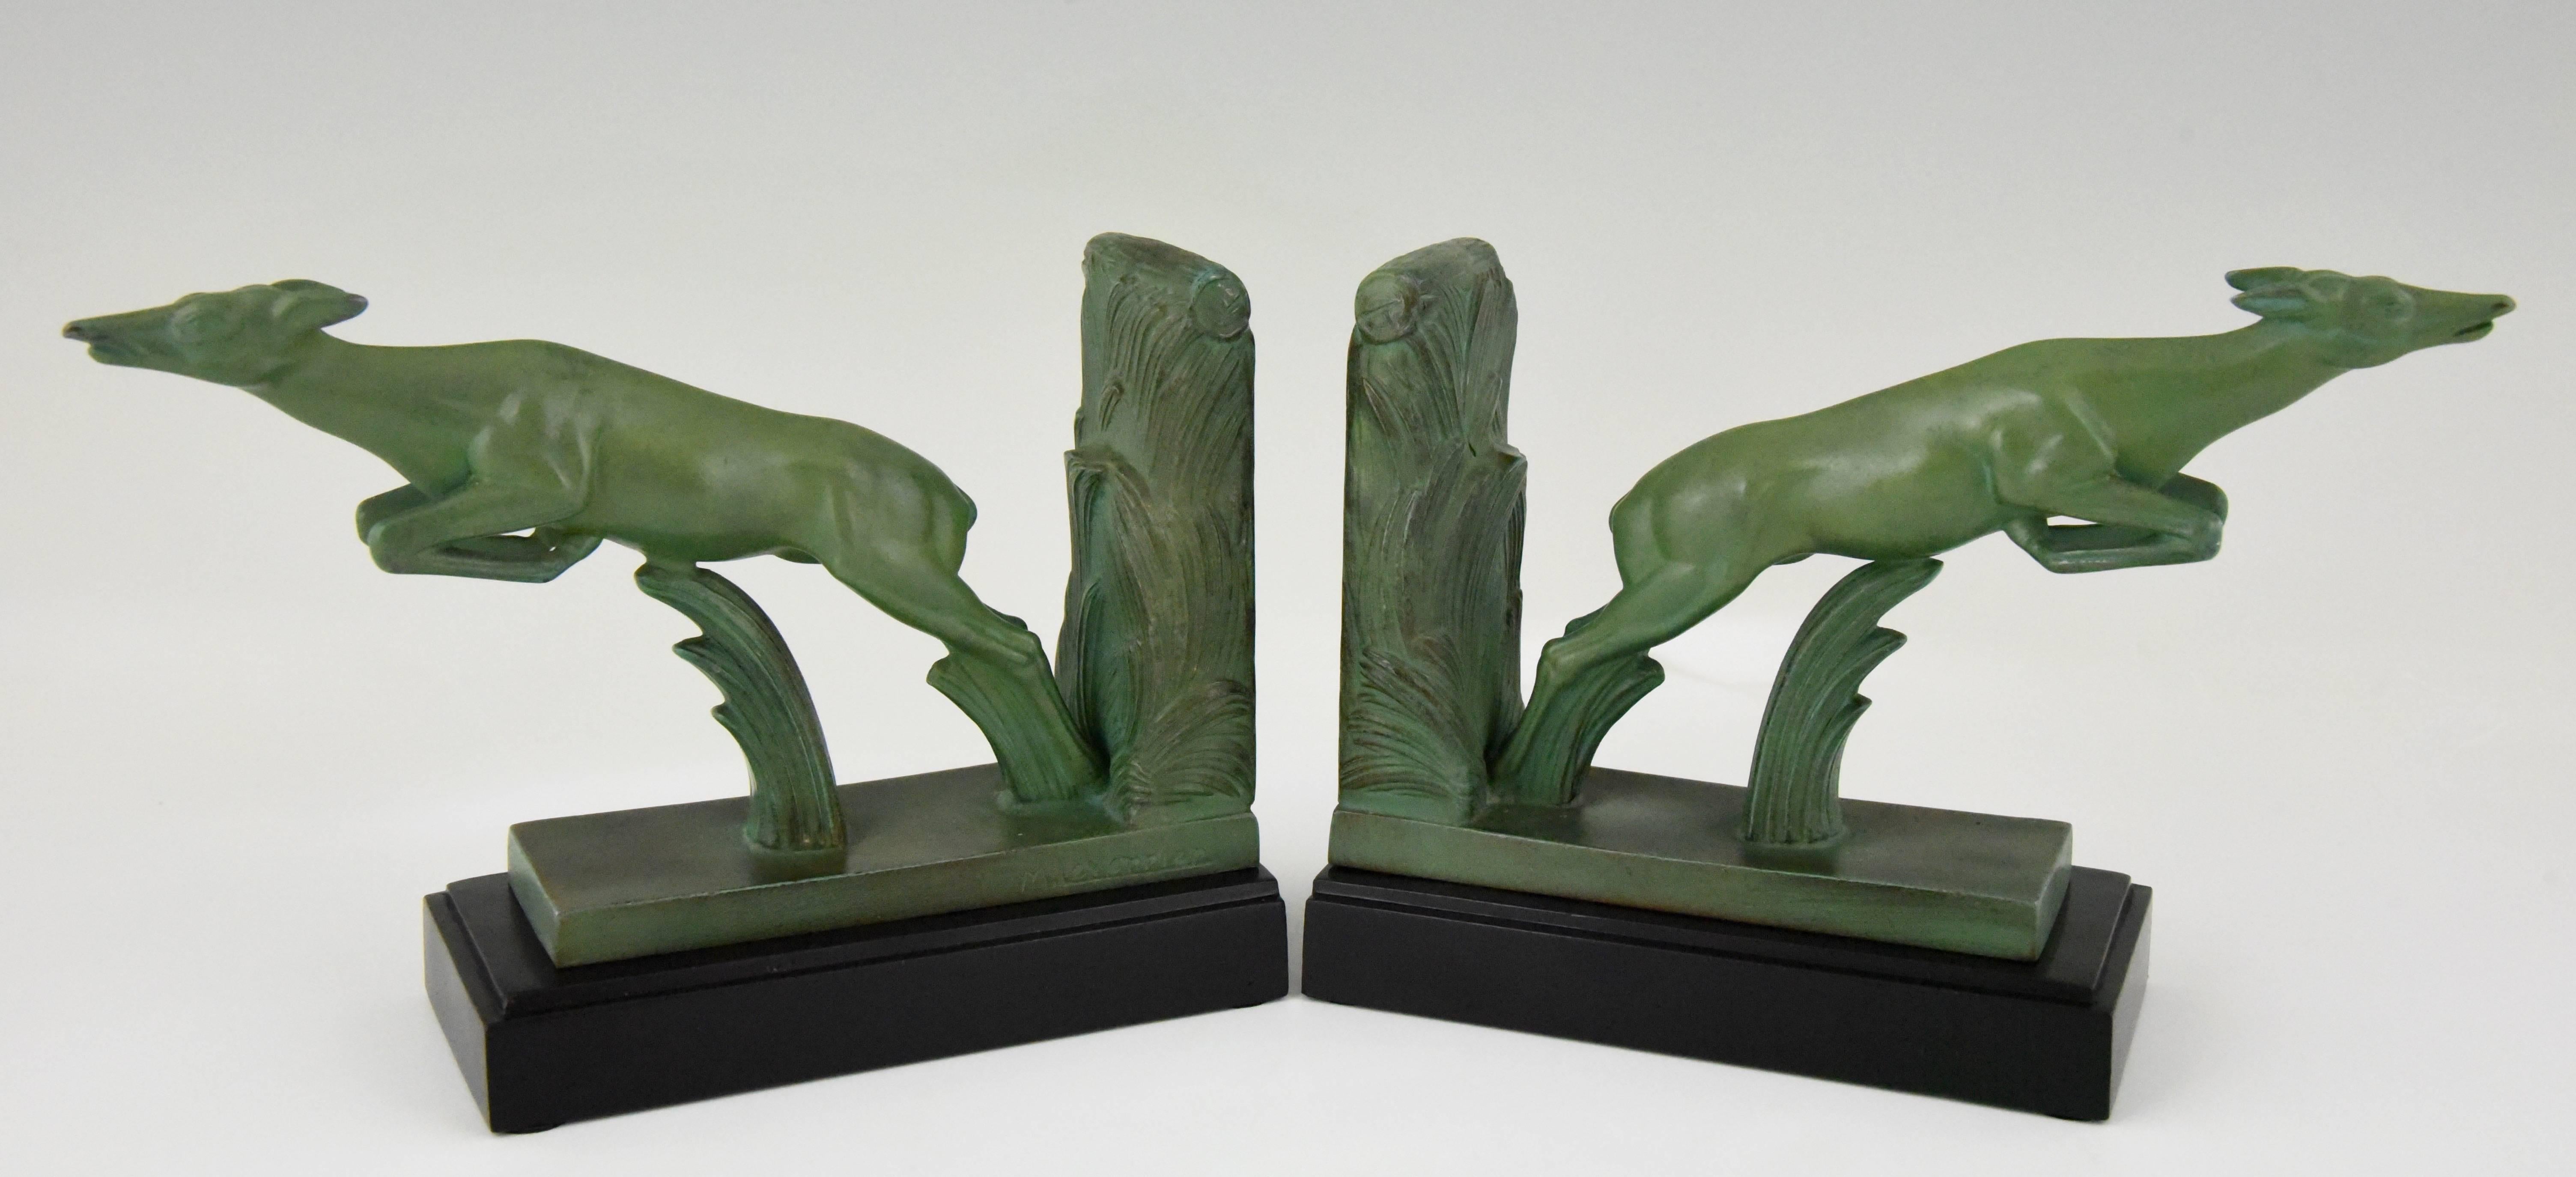 French  Art Deco Leaping Deer Bookends Max Le Verrier, 1930 France